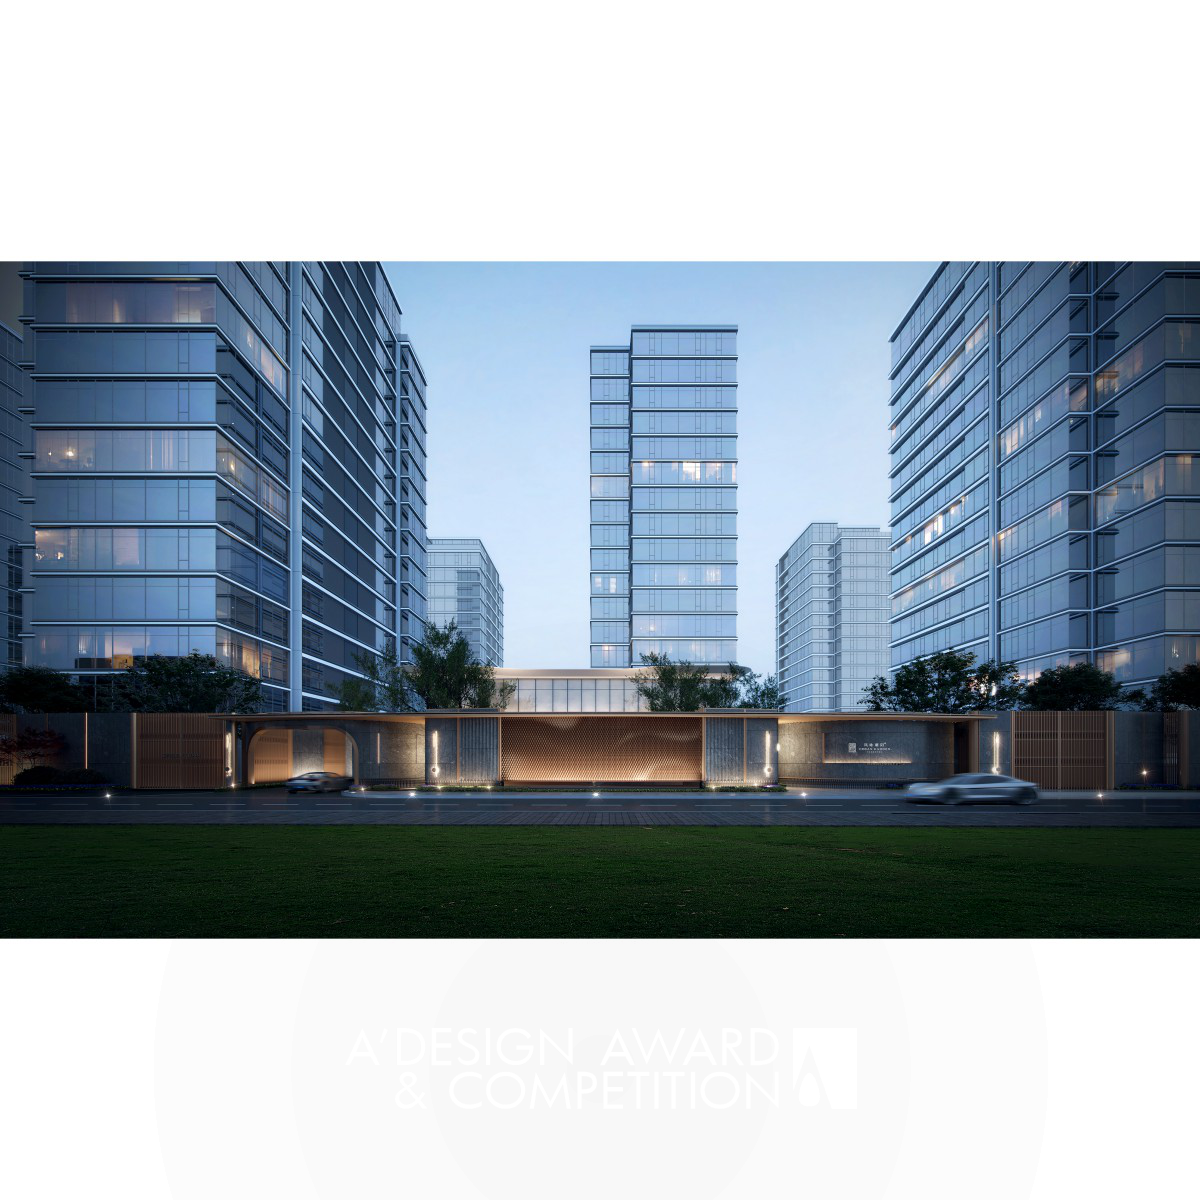 Wang Dan, Zhang Jiyu wins Bronze at the prestigious A' Construction and Real Estate Projects Design Award with Feng Yong Chao Yang Residential Community.